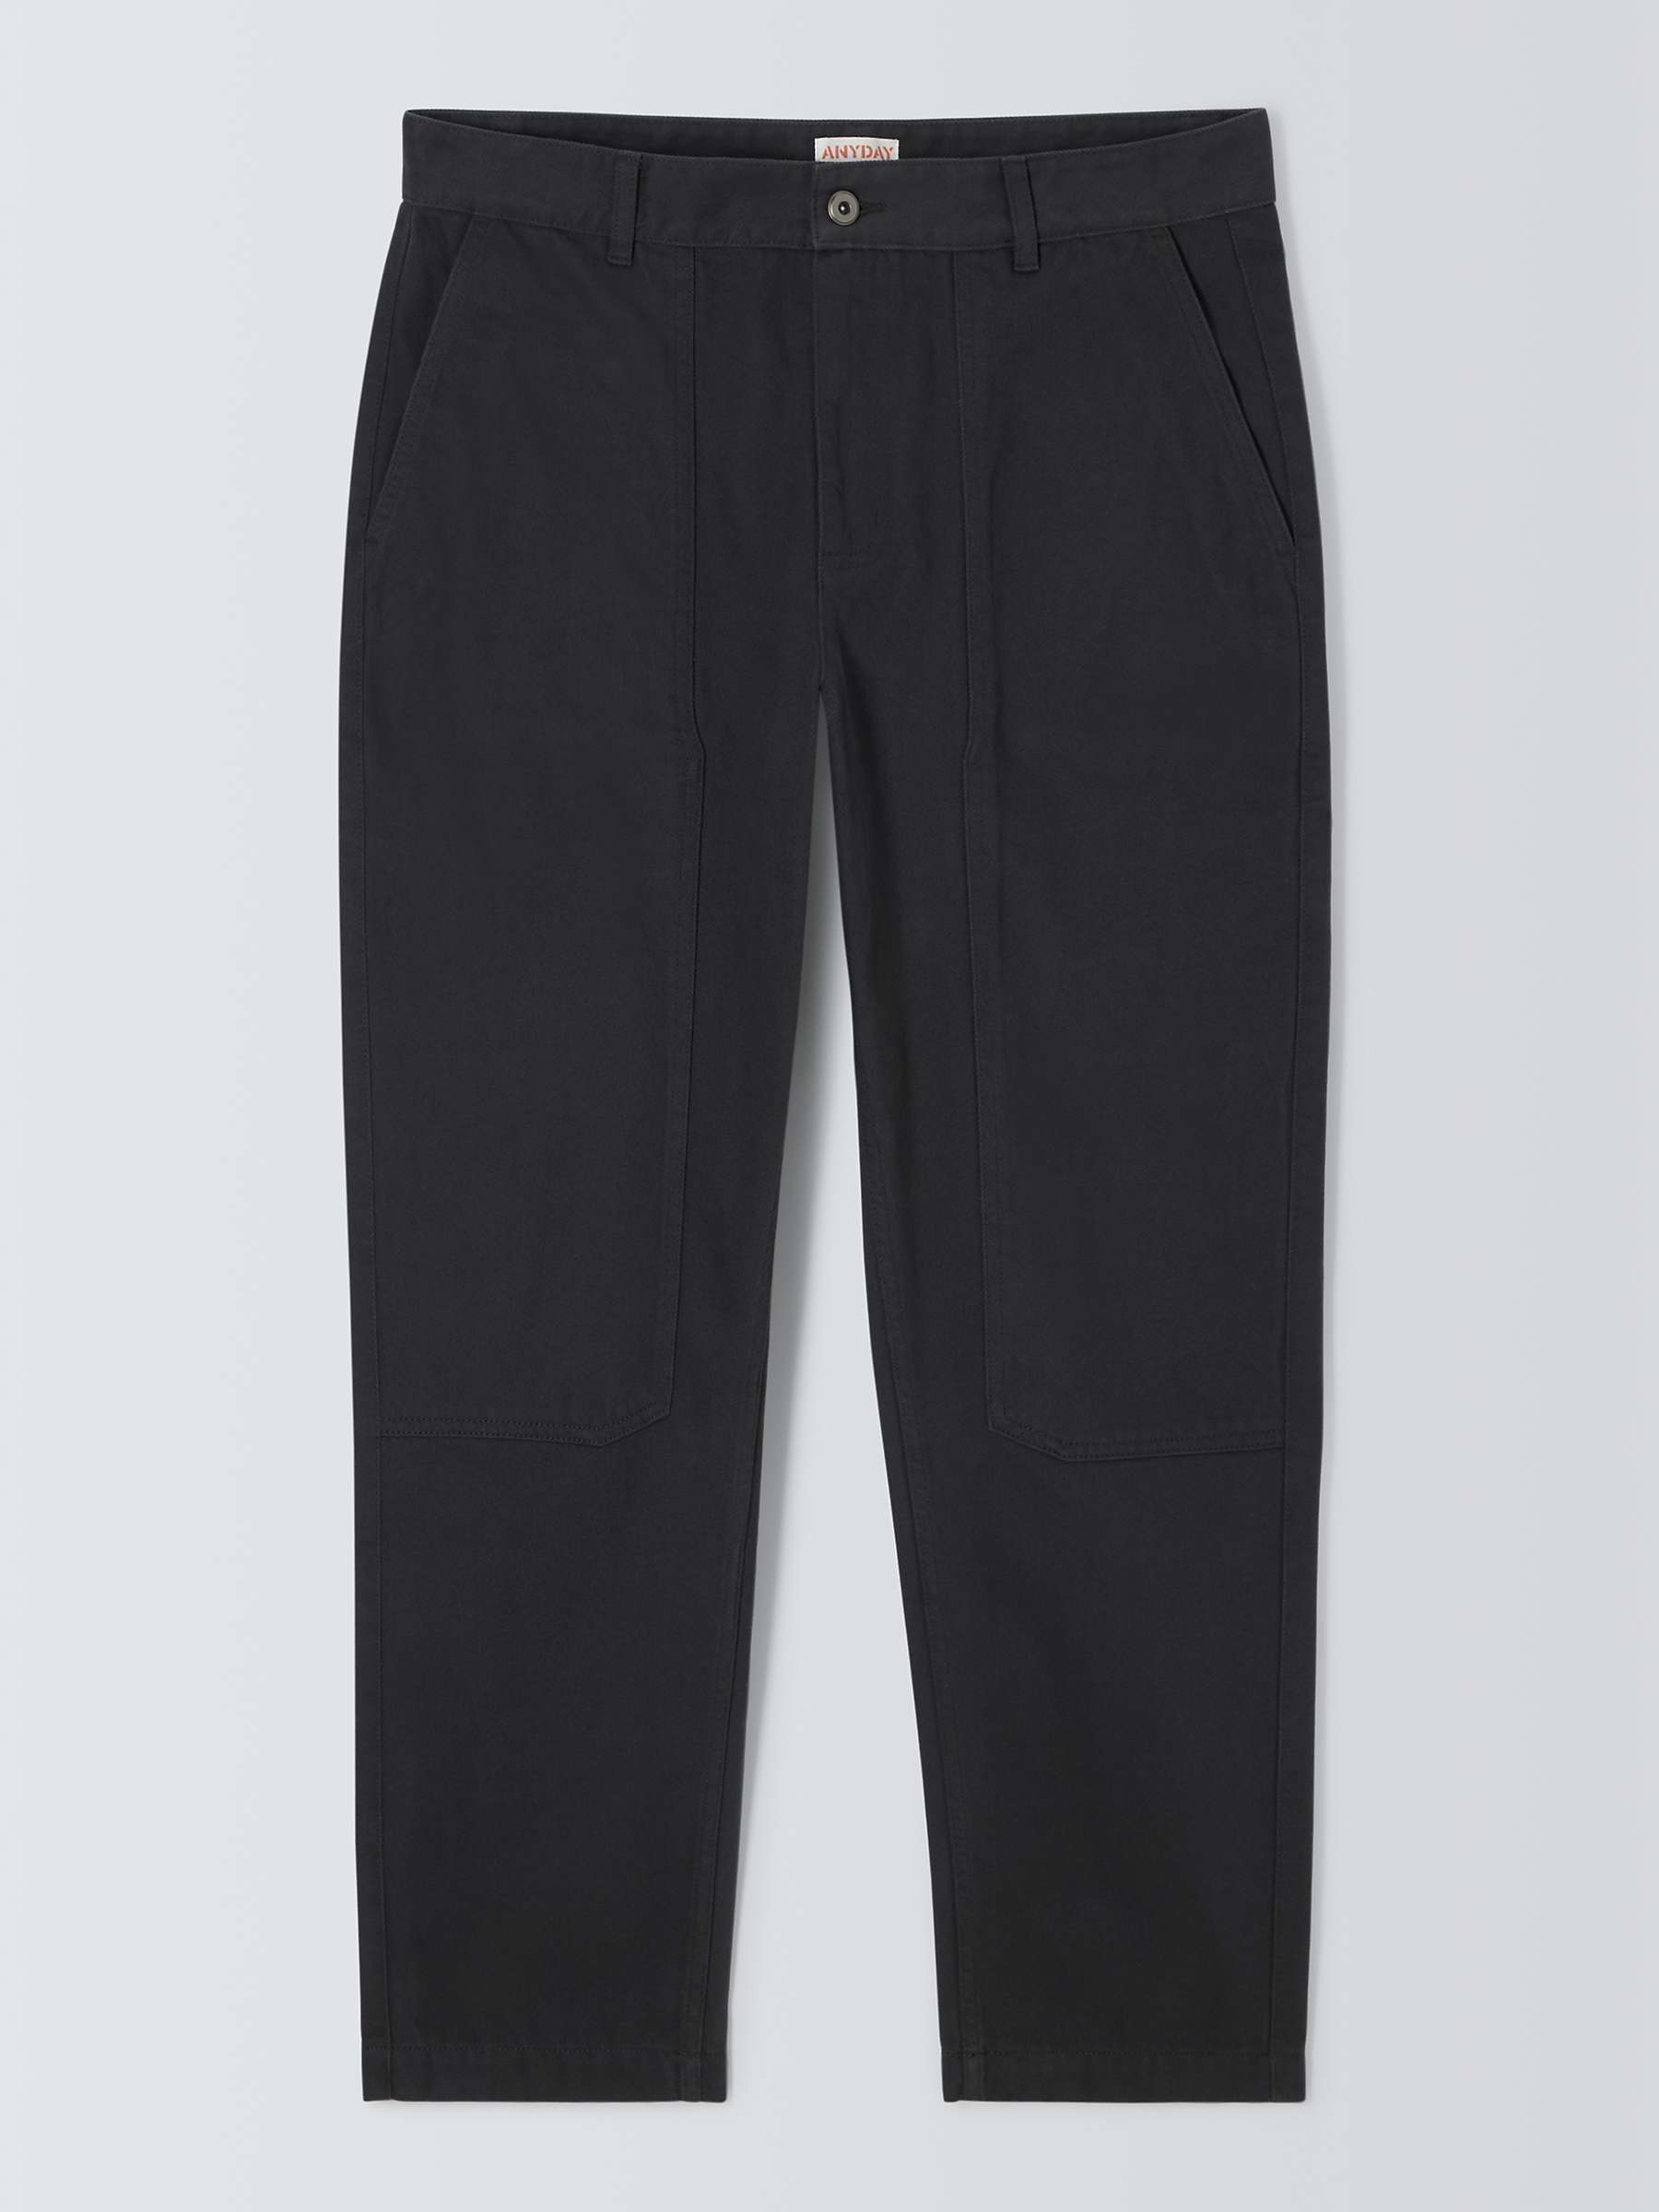 Buy ANYDAY Double Knee Trousers, Grey Online at johnlewis.com